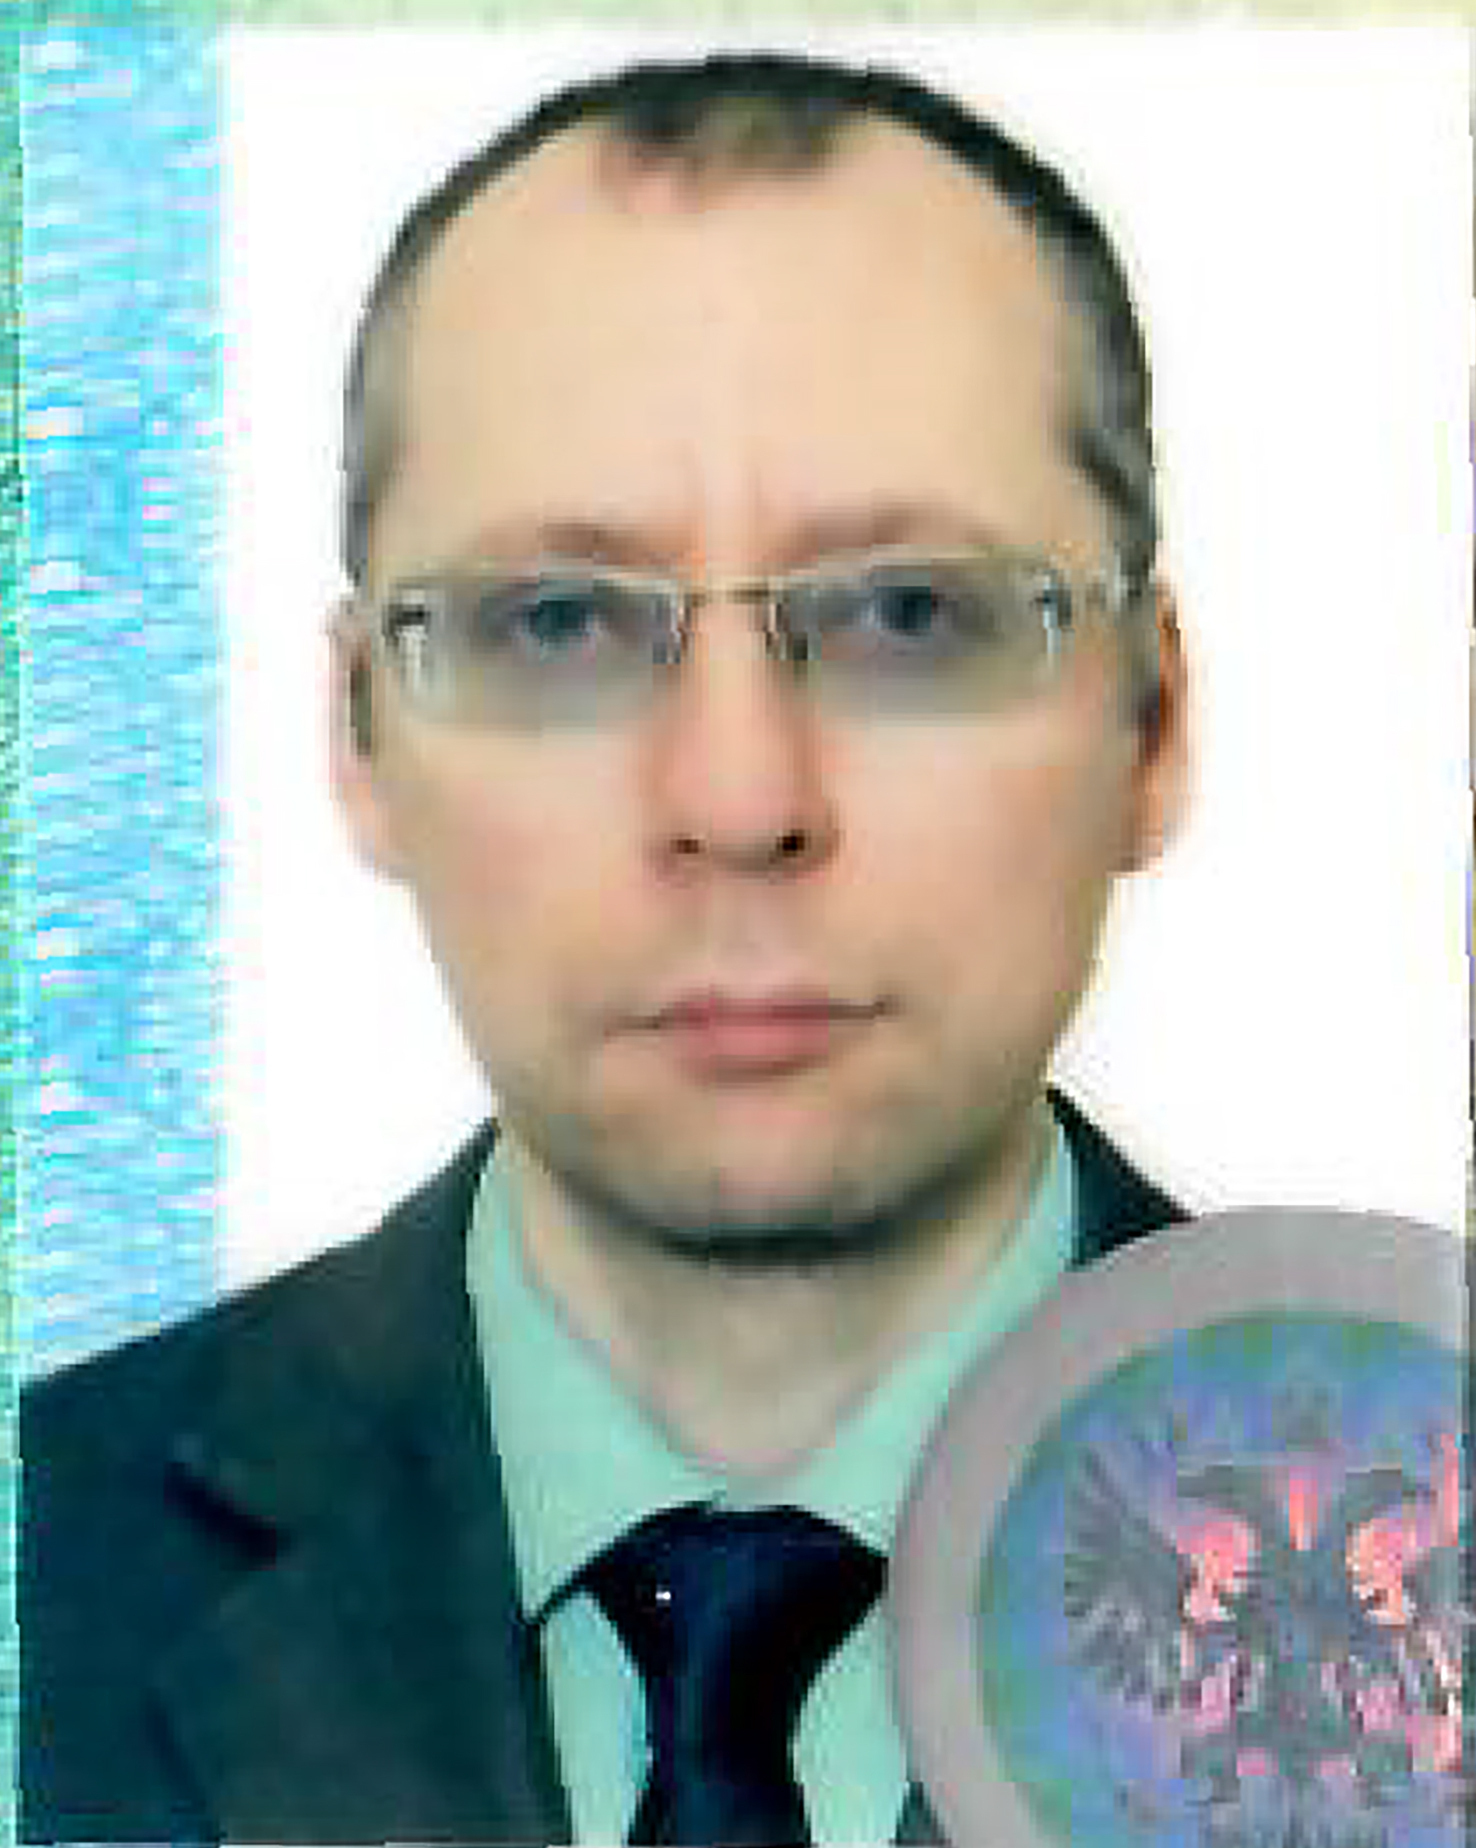 An image taken with permission from the passport photo page of Russian diplomat Boris Bondarev on May 23.